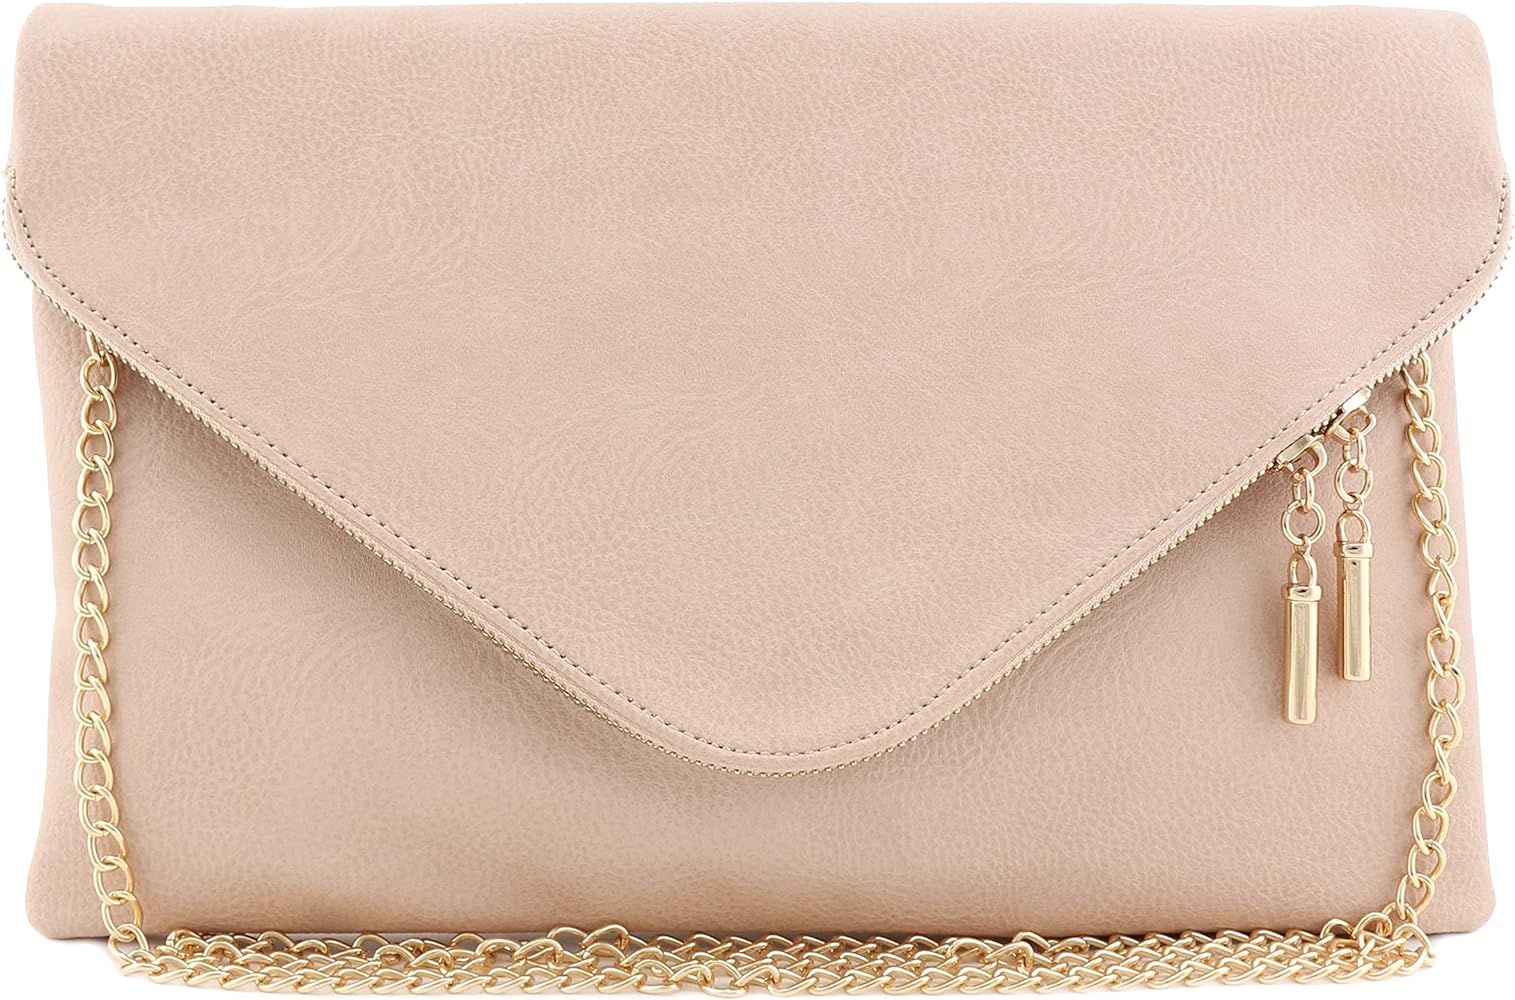 Large Envelope Clutch Bag with Chain Strap | Amazon (US)